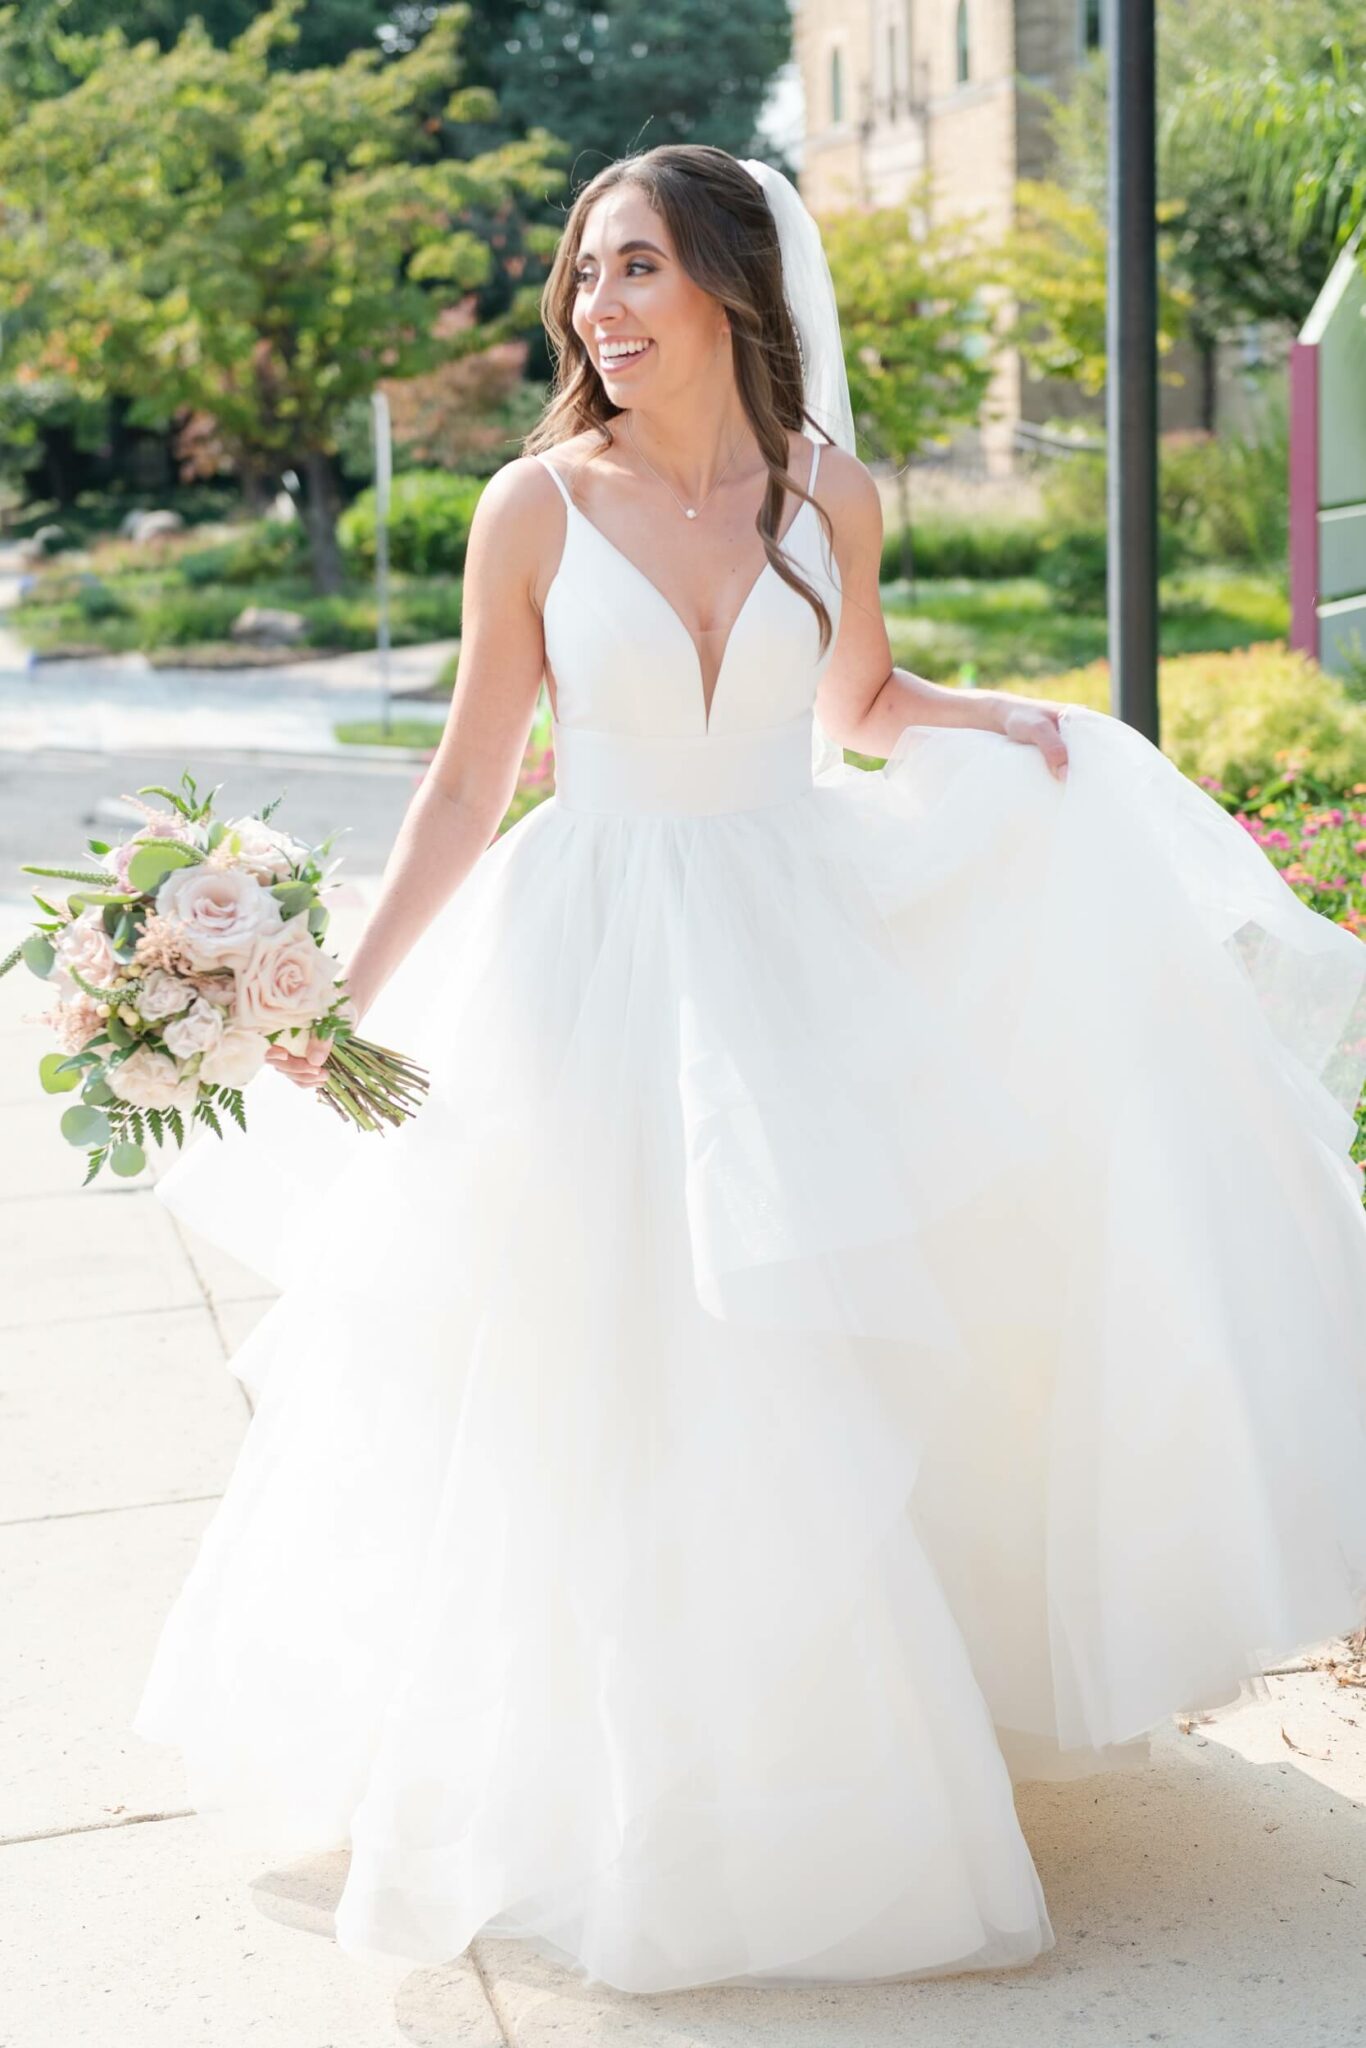 DC Wedding Planning Packages and Services